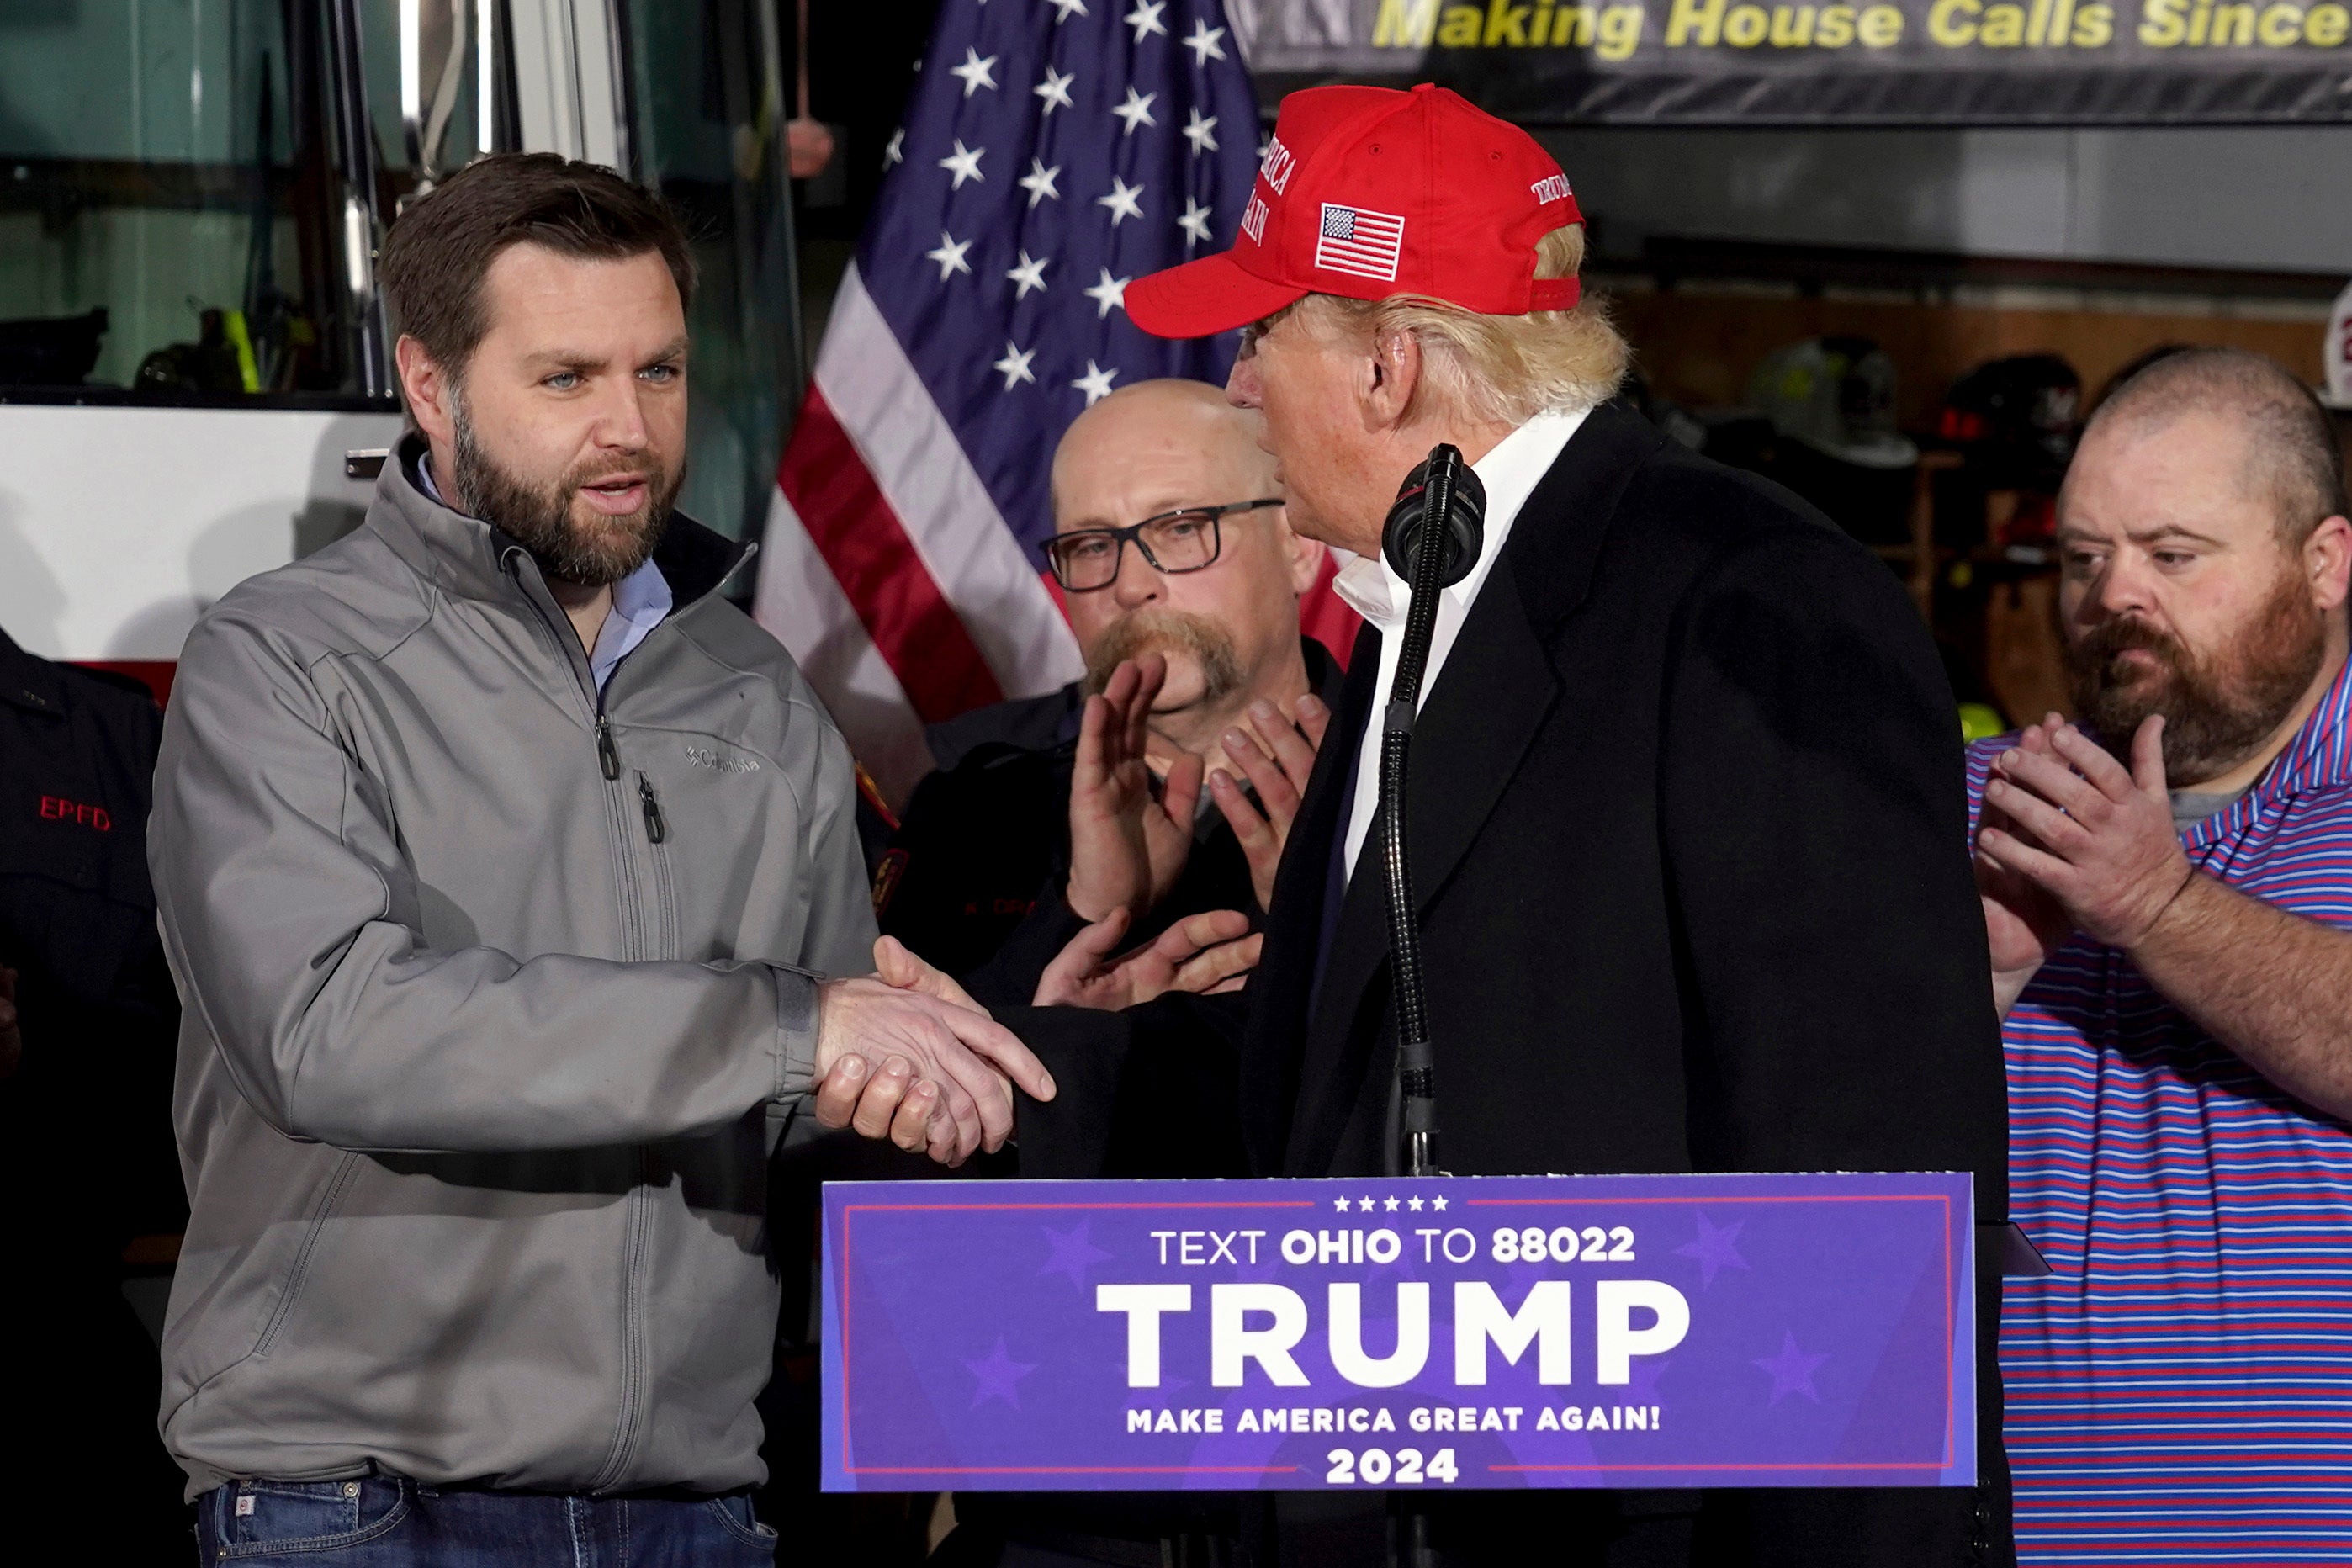 Trump greets JD Vance , who said he couldn’t understand why anyone would back the bill